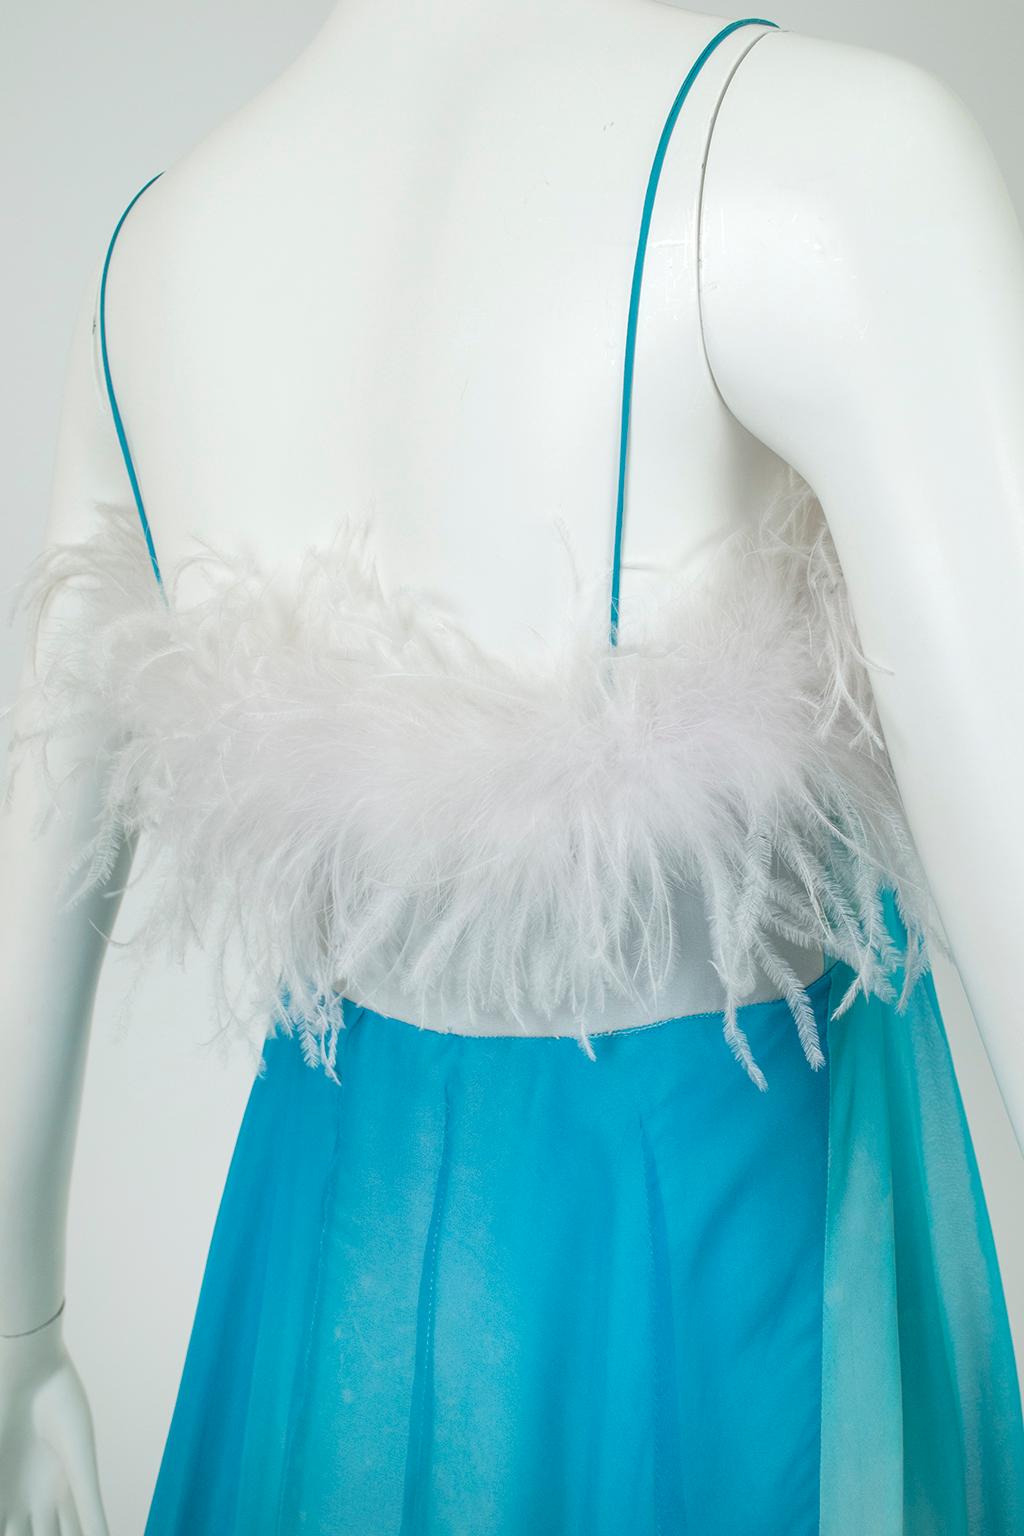 Aqua Ombré Tie Dye Chiffon Ball Gown with Ostrich Feather Trim – XS, 1960s For Sale 2